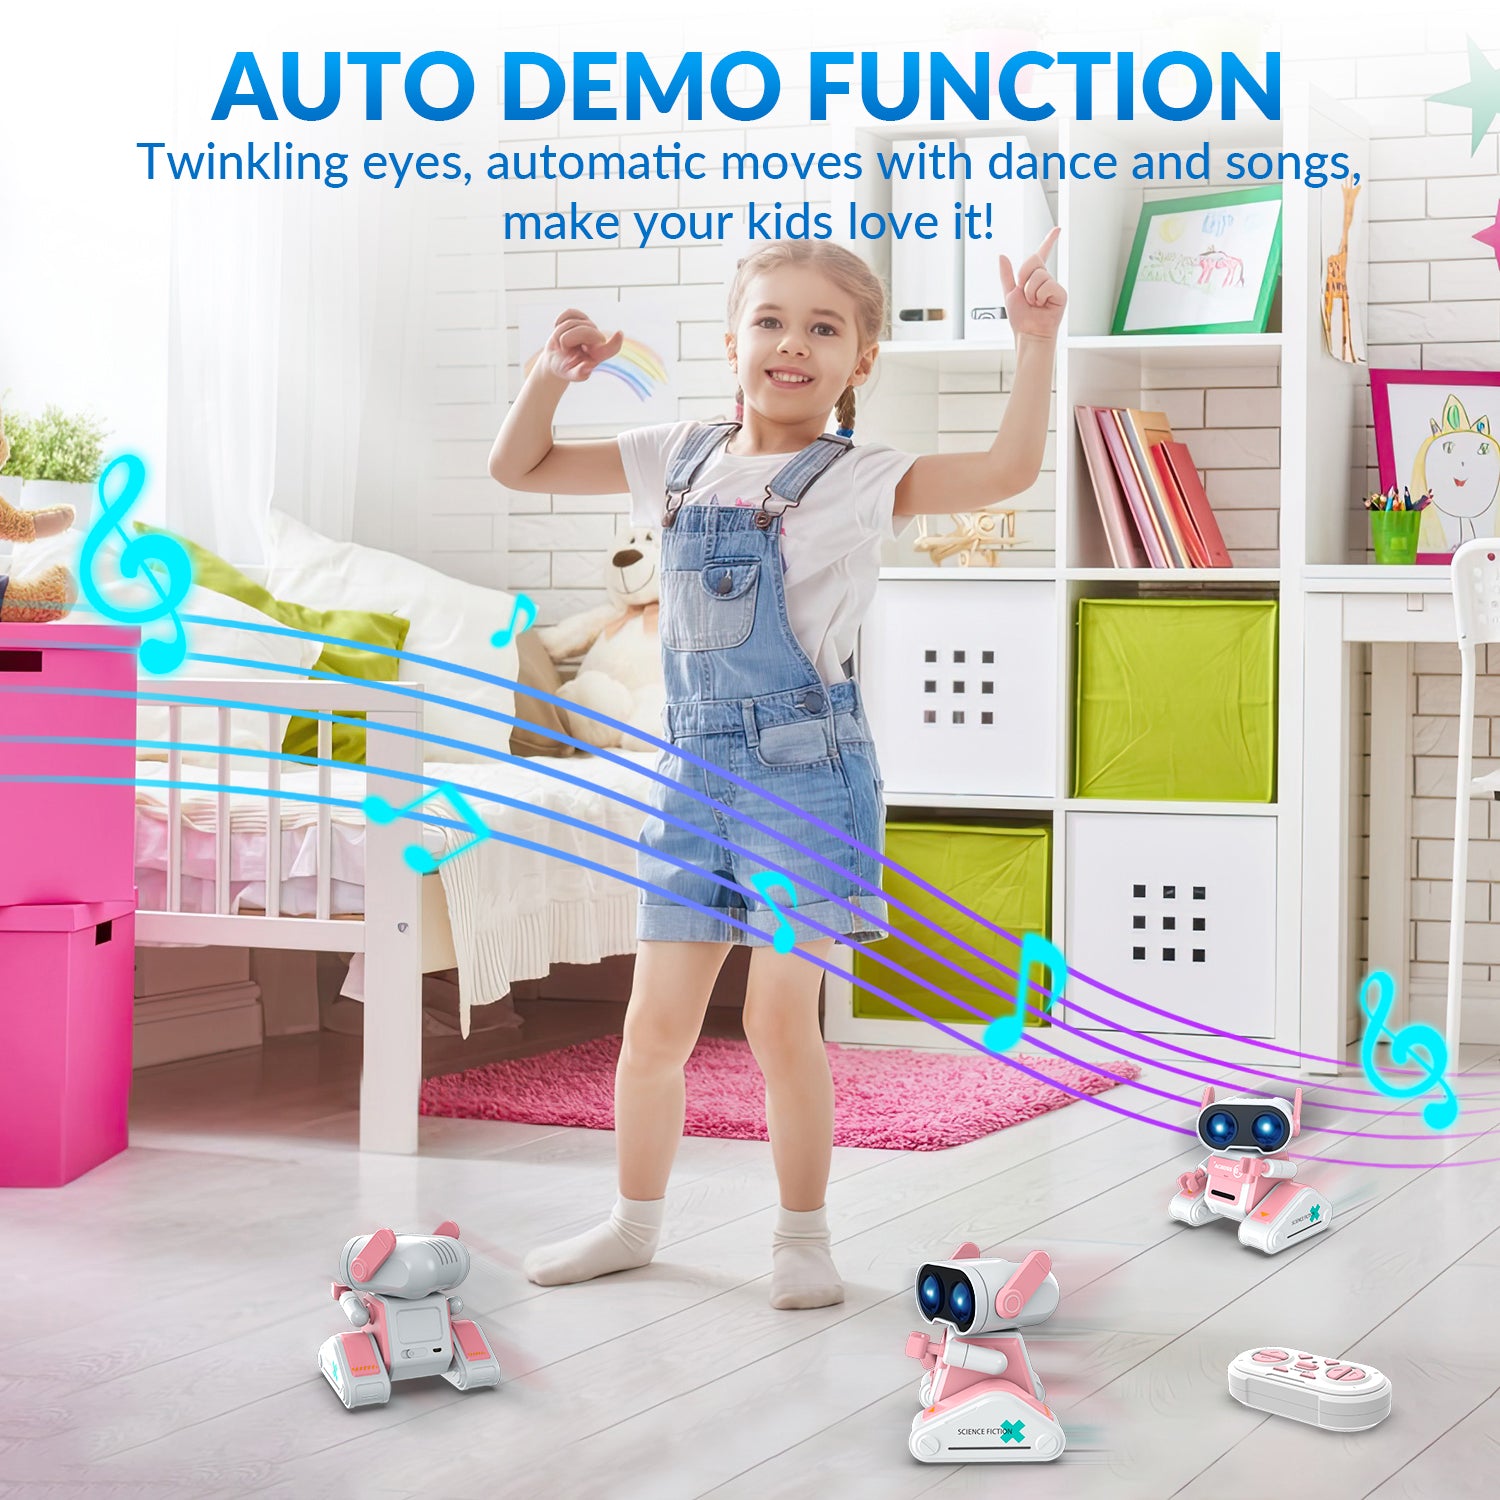 STEMTRON Rechargeable RC Robot Toys with Auto Demo, Dance Moves, Music for Kids (Pink)